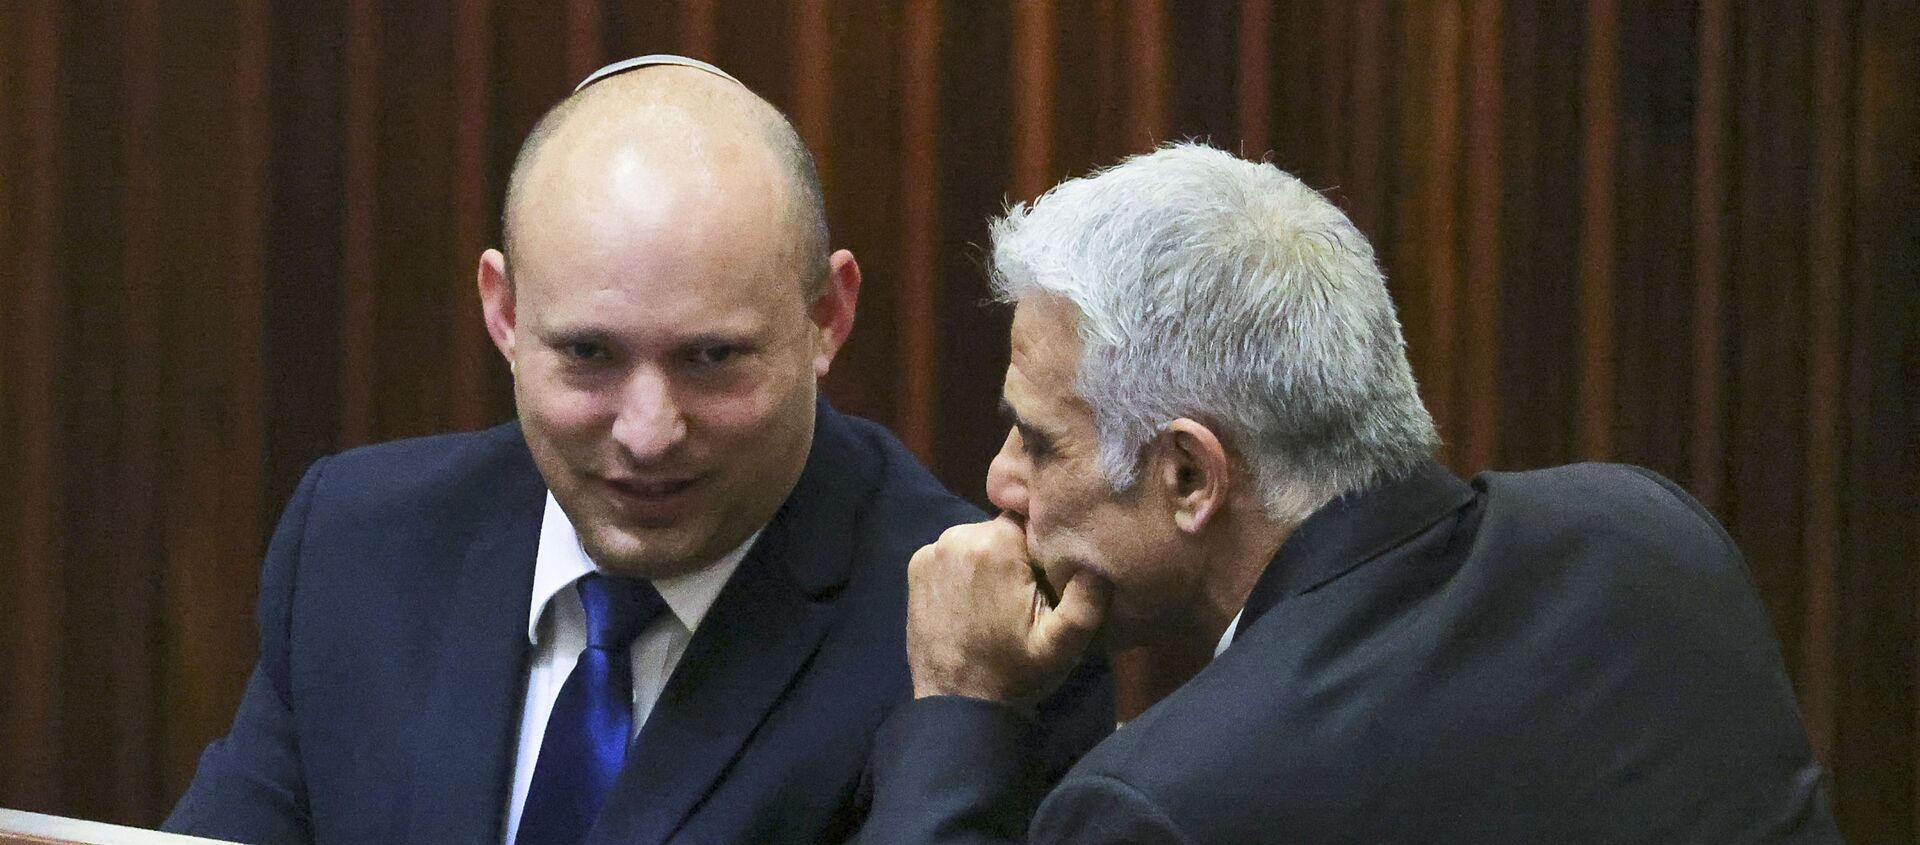 Israel's Yamina party leader, Naftali Bennett (L), smiles as he speaks to Yesh Atid party leader, Yair Lapid, during a special session of the Knesset, Israel's parliament, to elect a new president, in Jerusalem on 2 June 2021. Israeli politicians battling to unseat veteran right-wing Prime Minister Benjamin Netanyahu - who has been in charge for 12 years, making him Israel's longest-running premier - were locked in last-ditch talks on today to hammer out their change coalition composed of bitter ideological rivals with a razor-thin majority. - Sputnik International, 1920, 03.06.2021